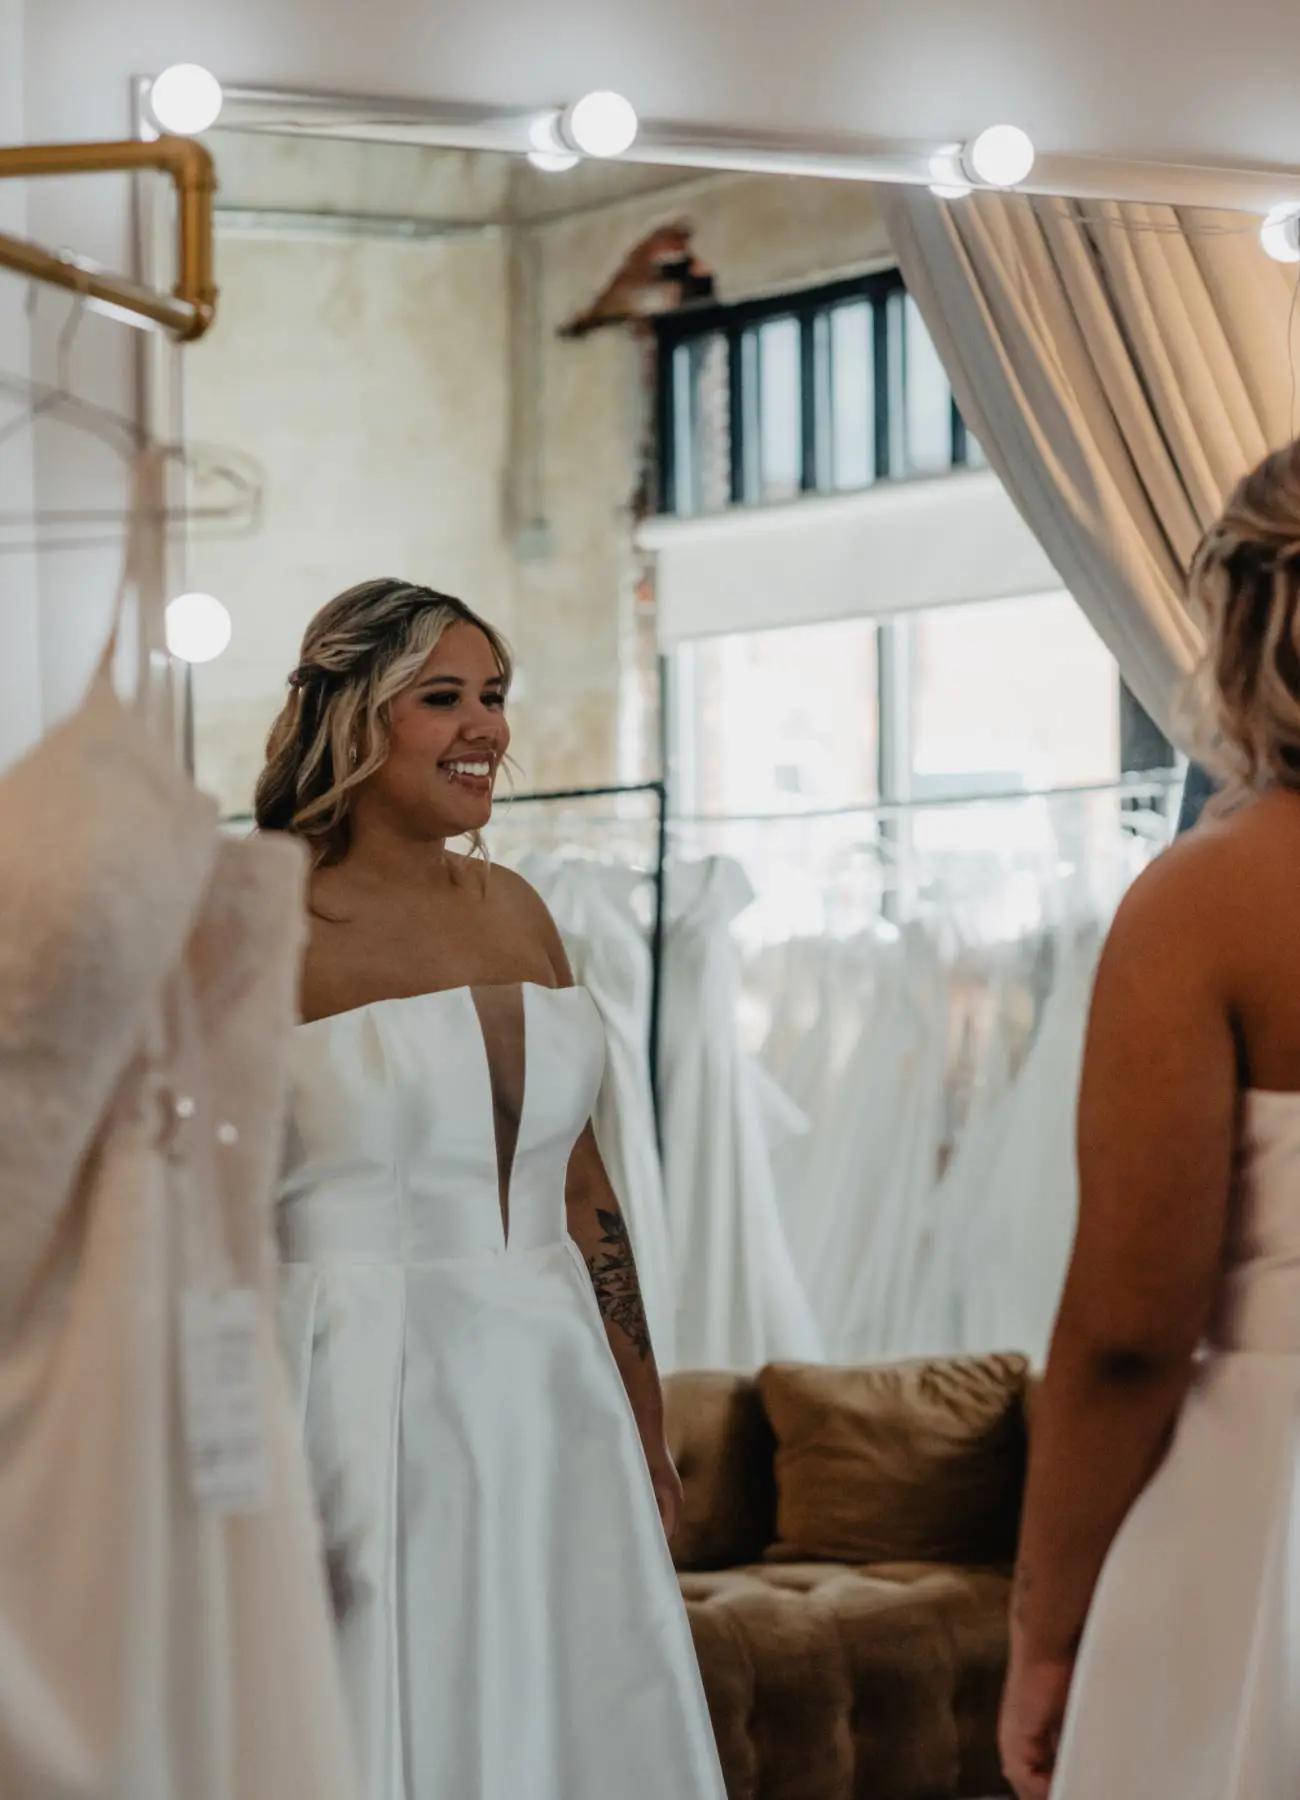 Overwhelmed, frustrated, and maybe didn't find the dress at your first appointment?